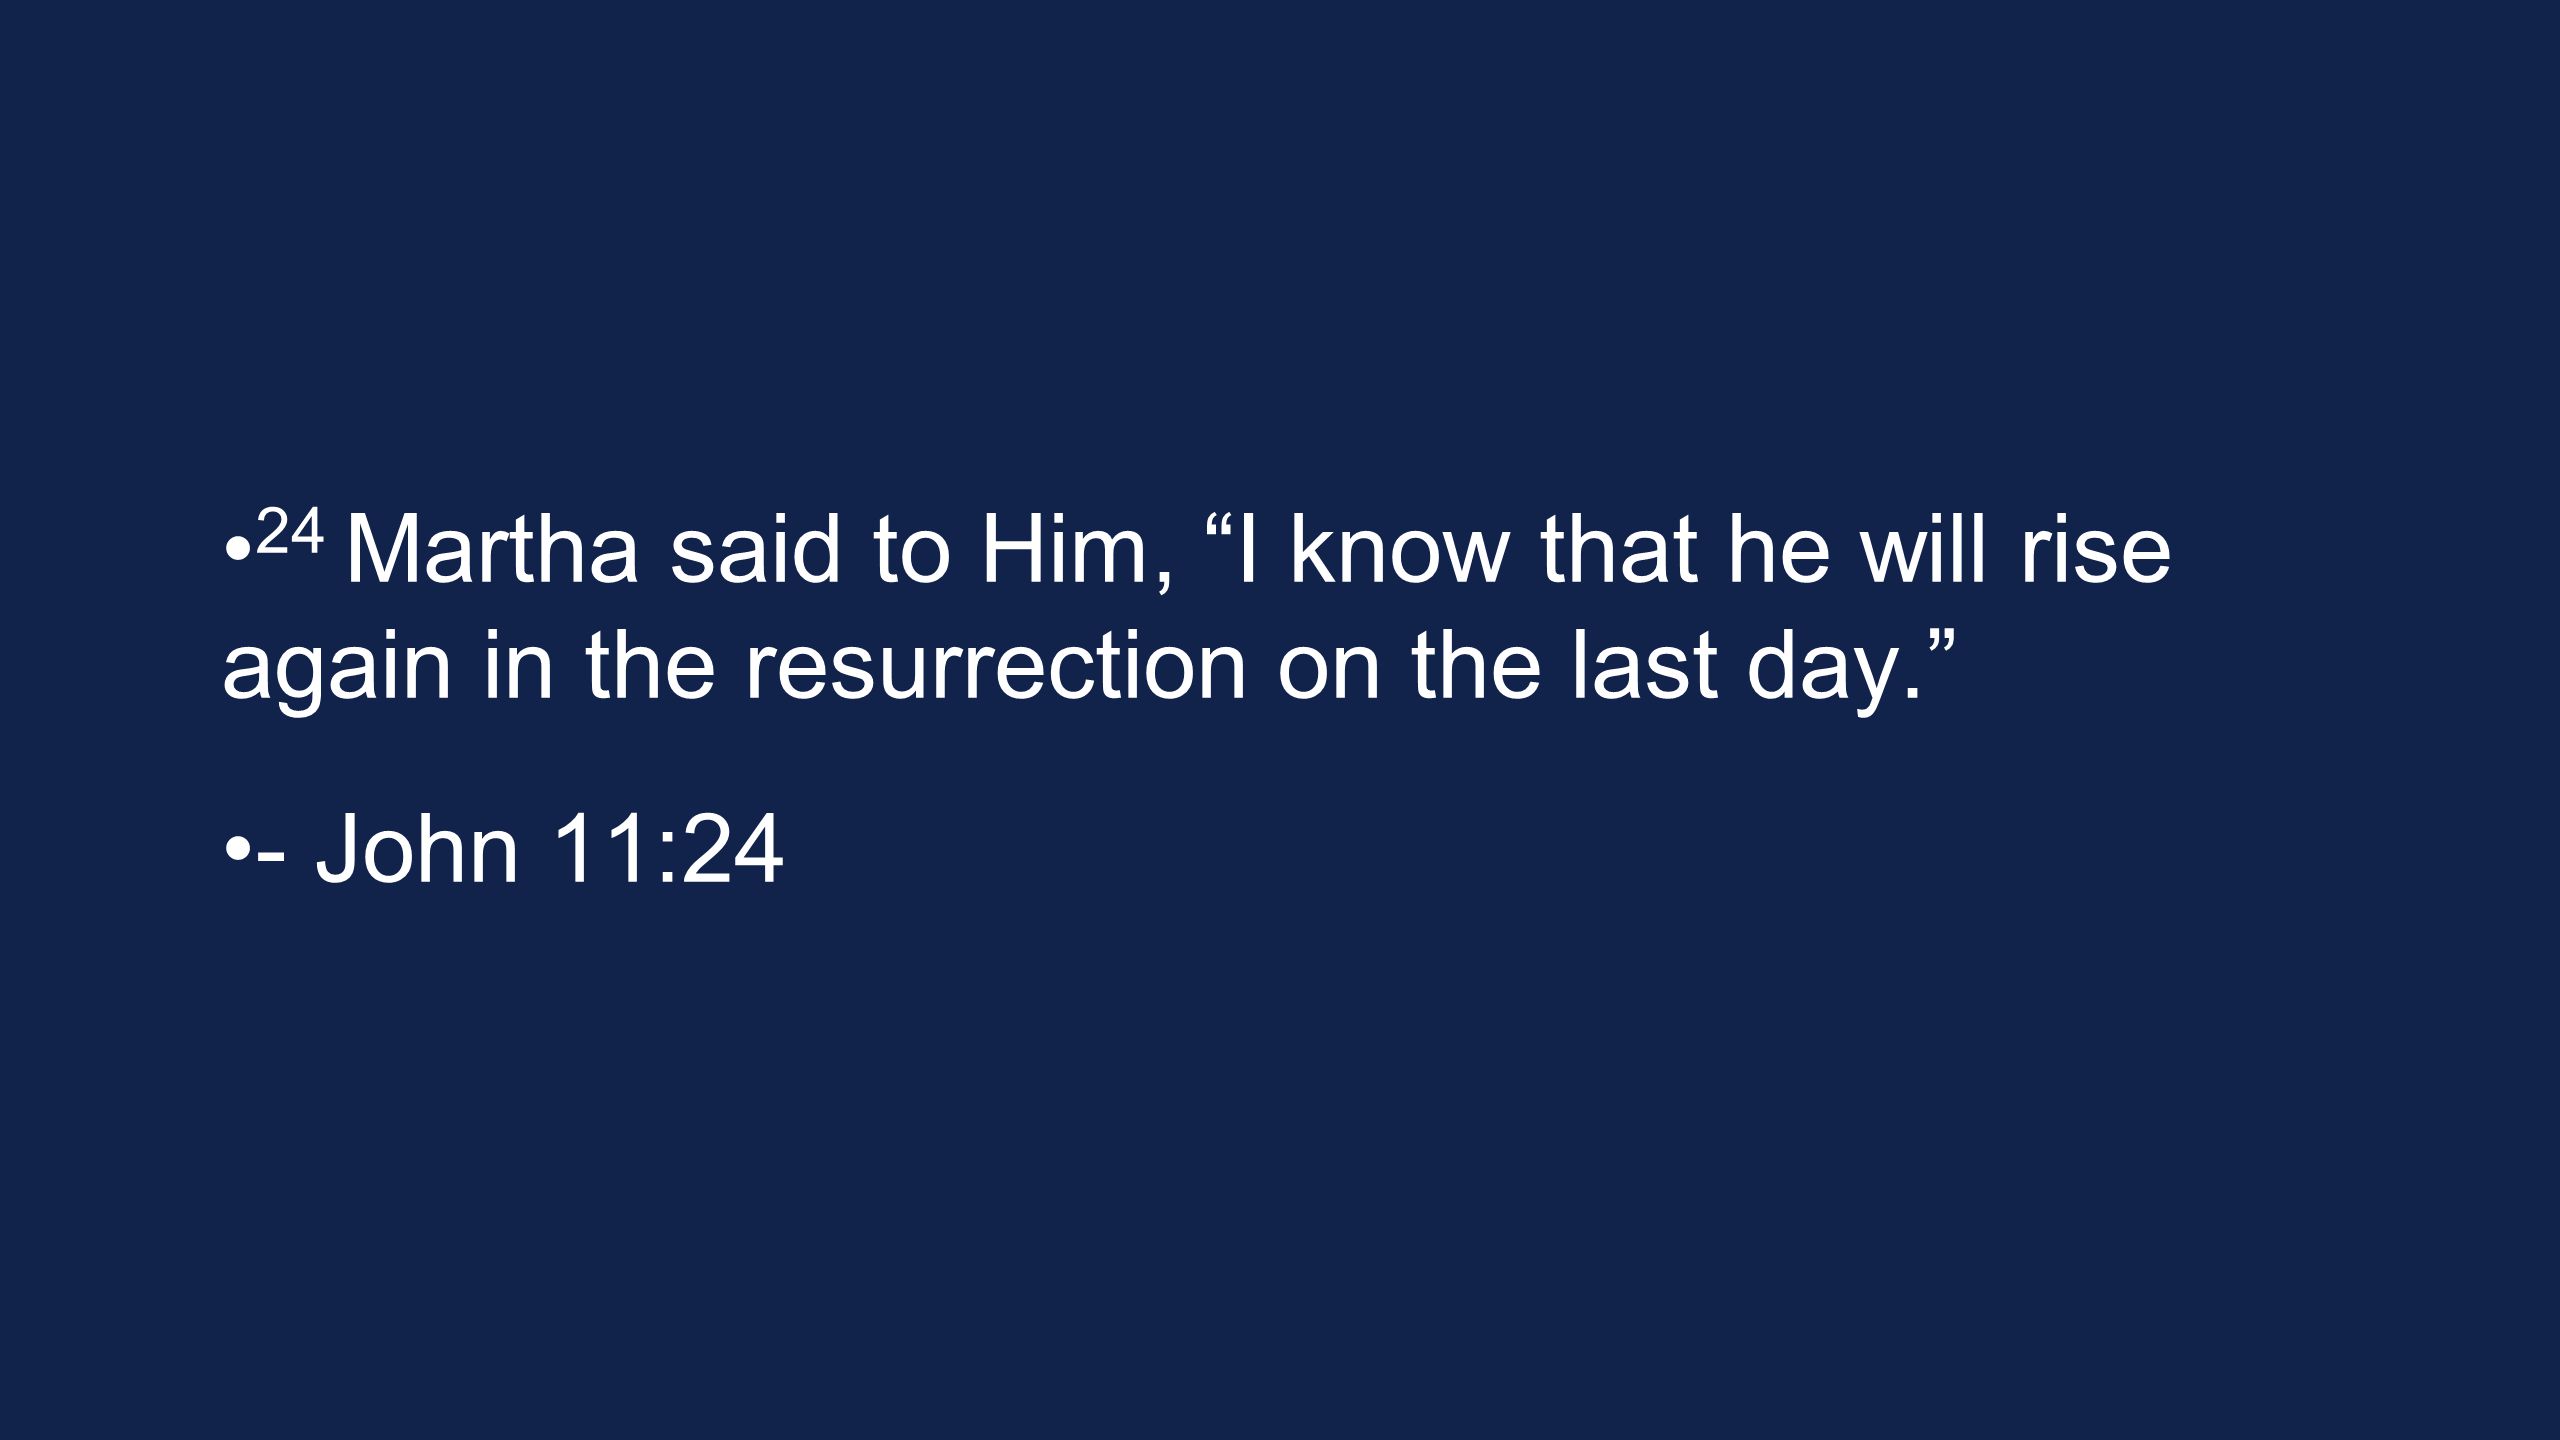 24 Martha said to Him, I know that he will rise again in the resurrection on the last day. - John 11:24